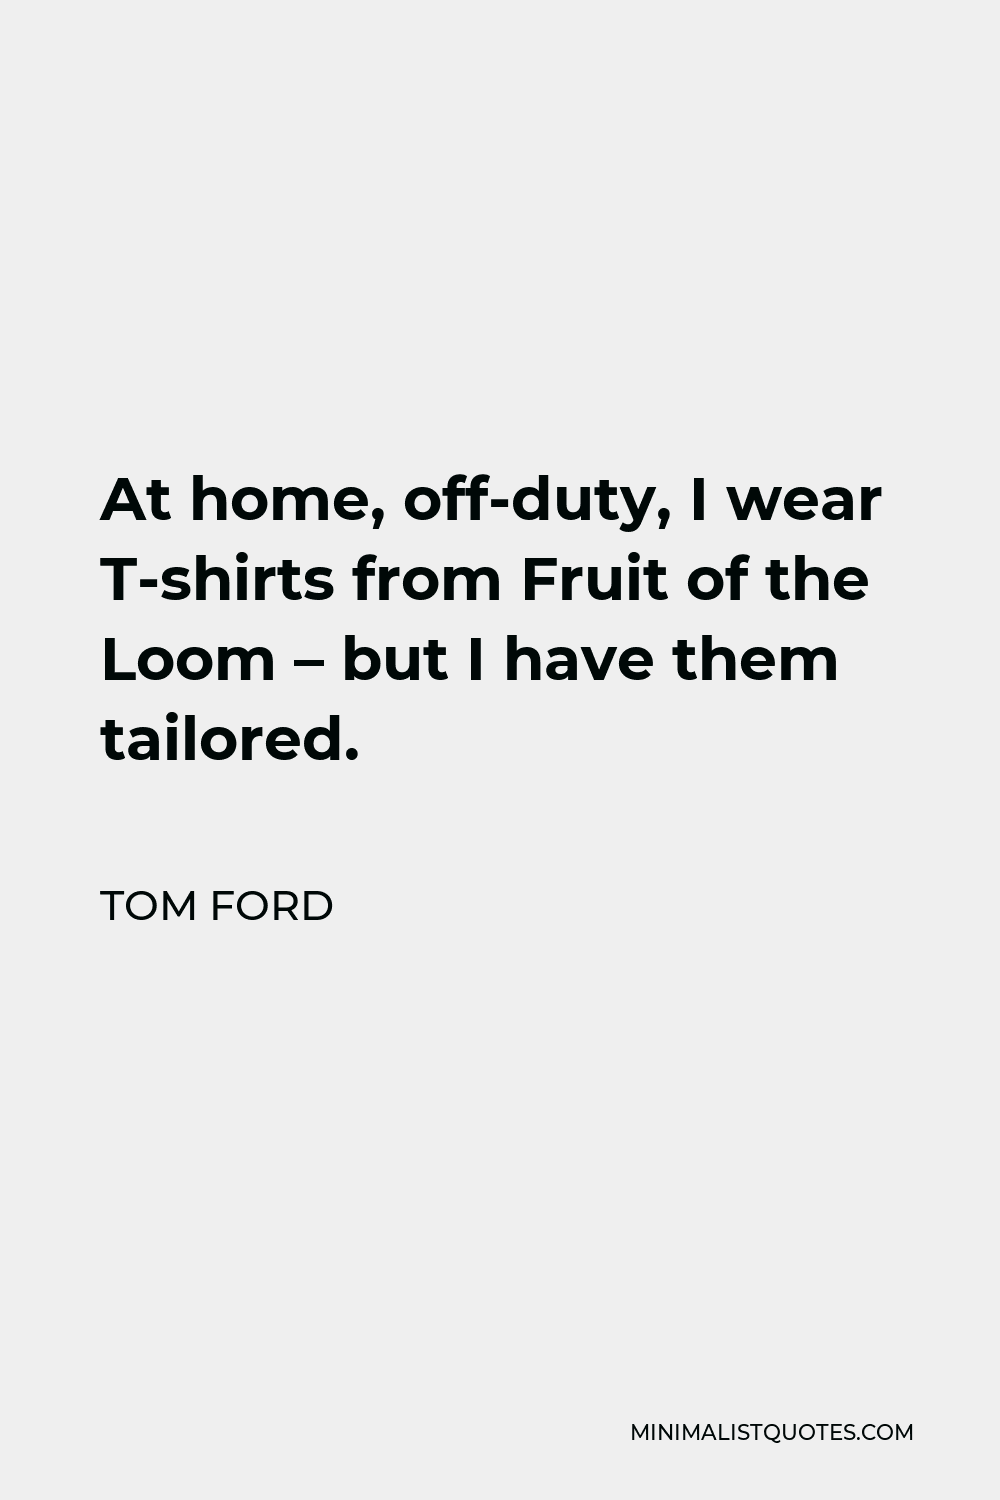 Tom Ford Quote: At home, off-duty, I wear T-shirts from Fruit of the Loom -  but I have them tailored.